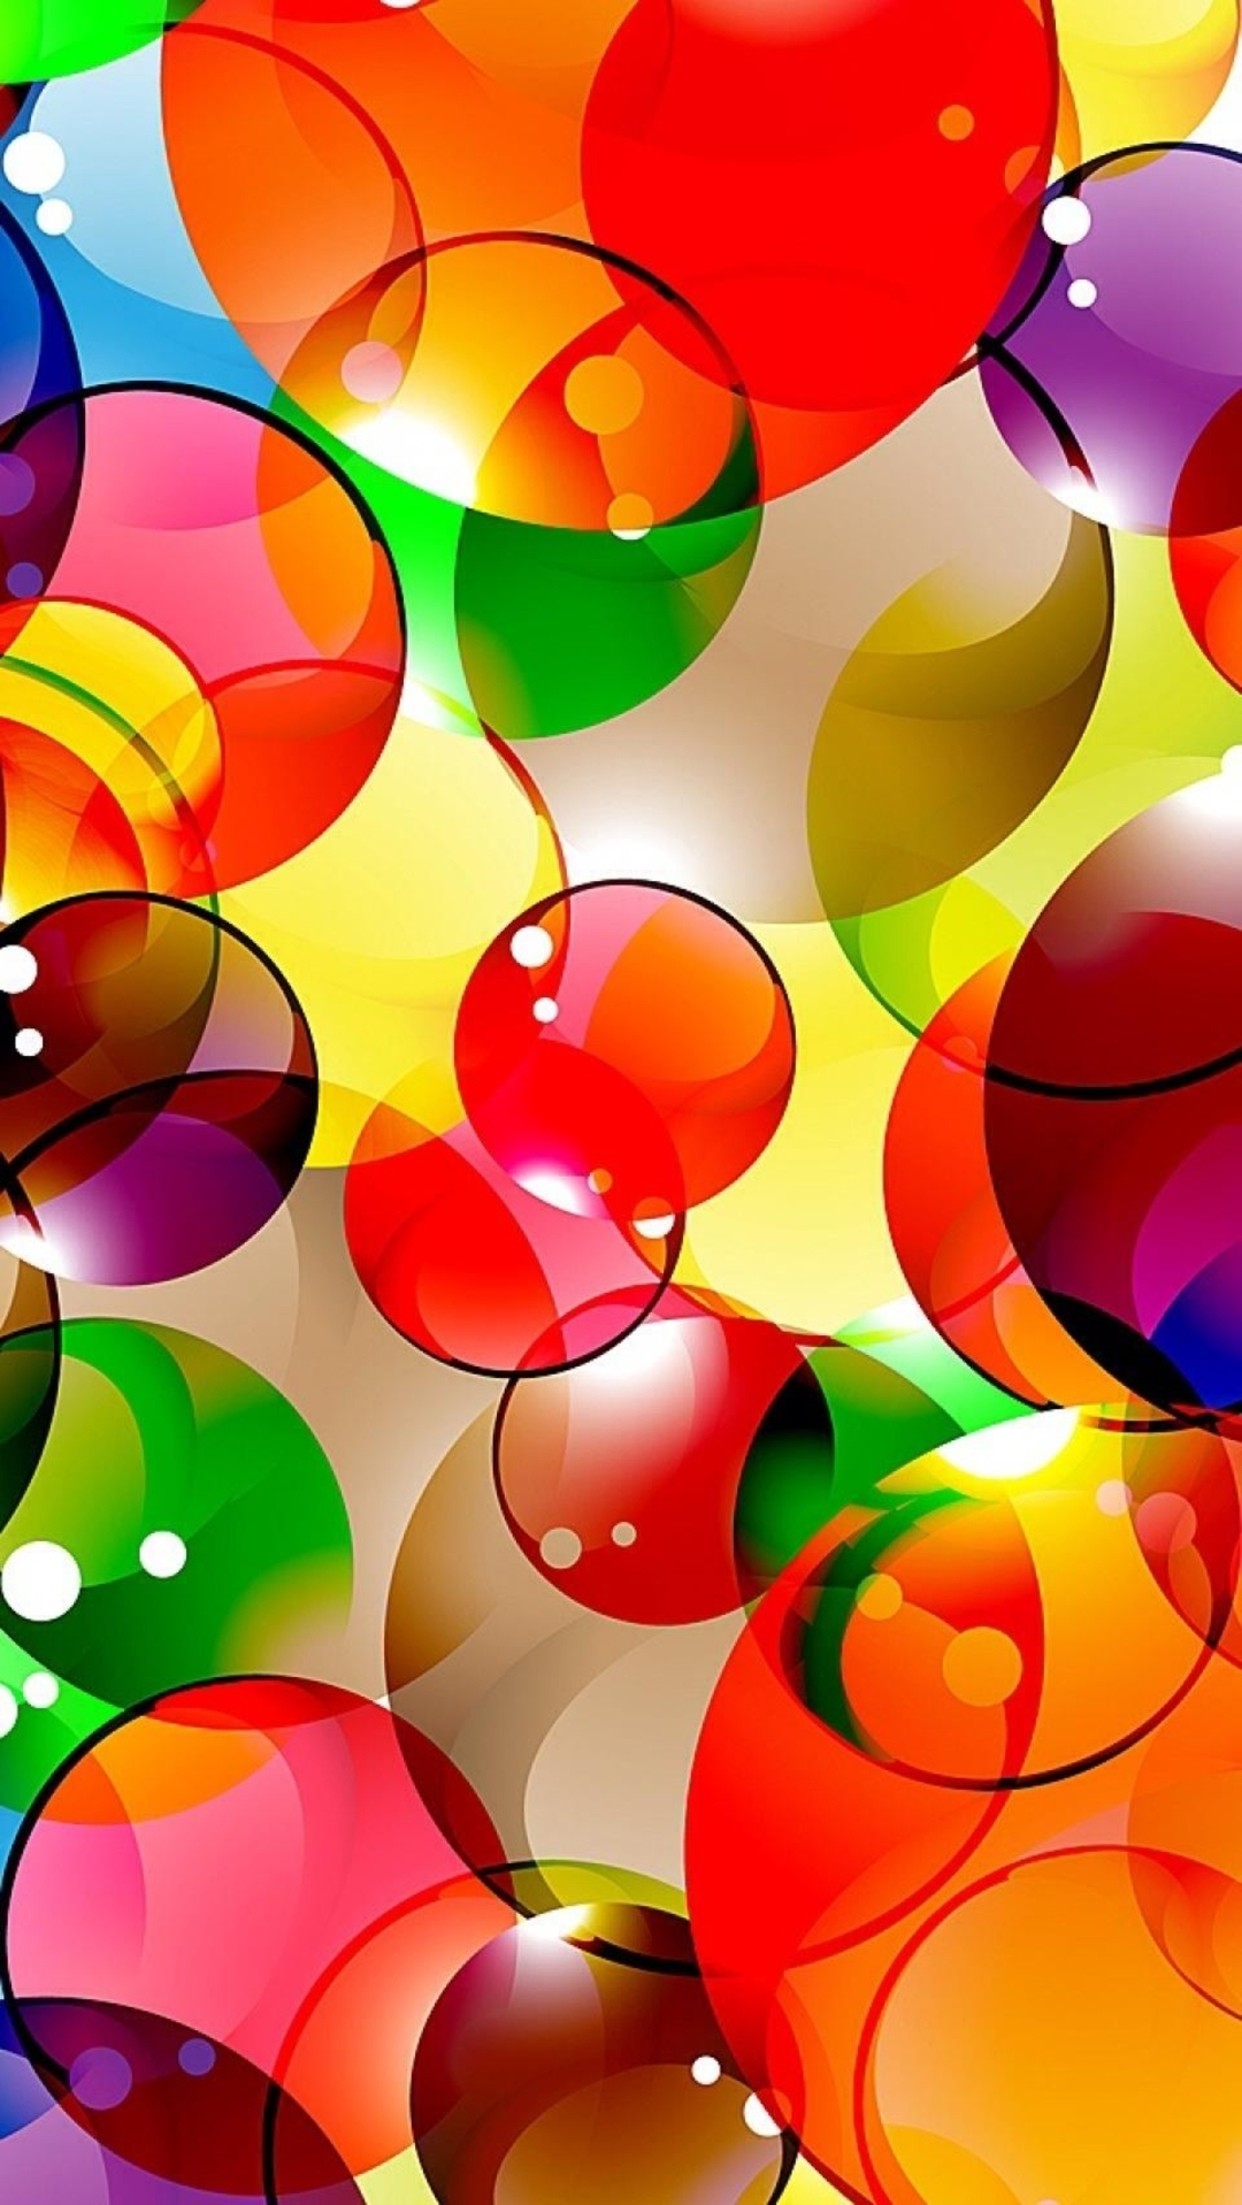 The 1 - Colorful Background Hd - HD Wallpaper 